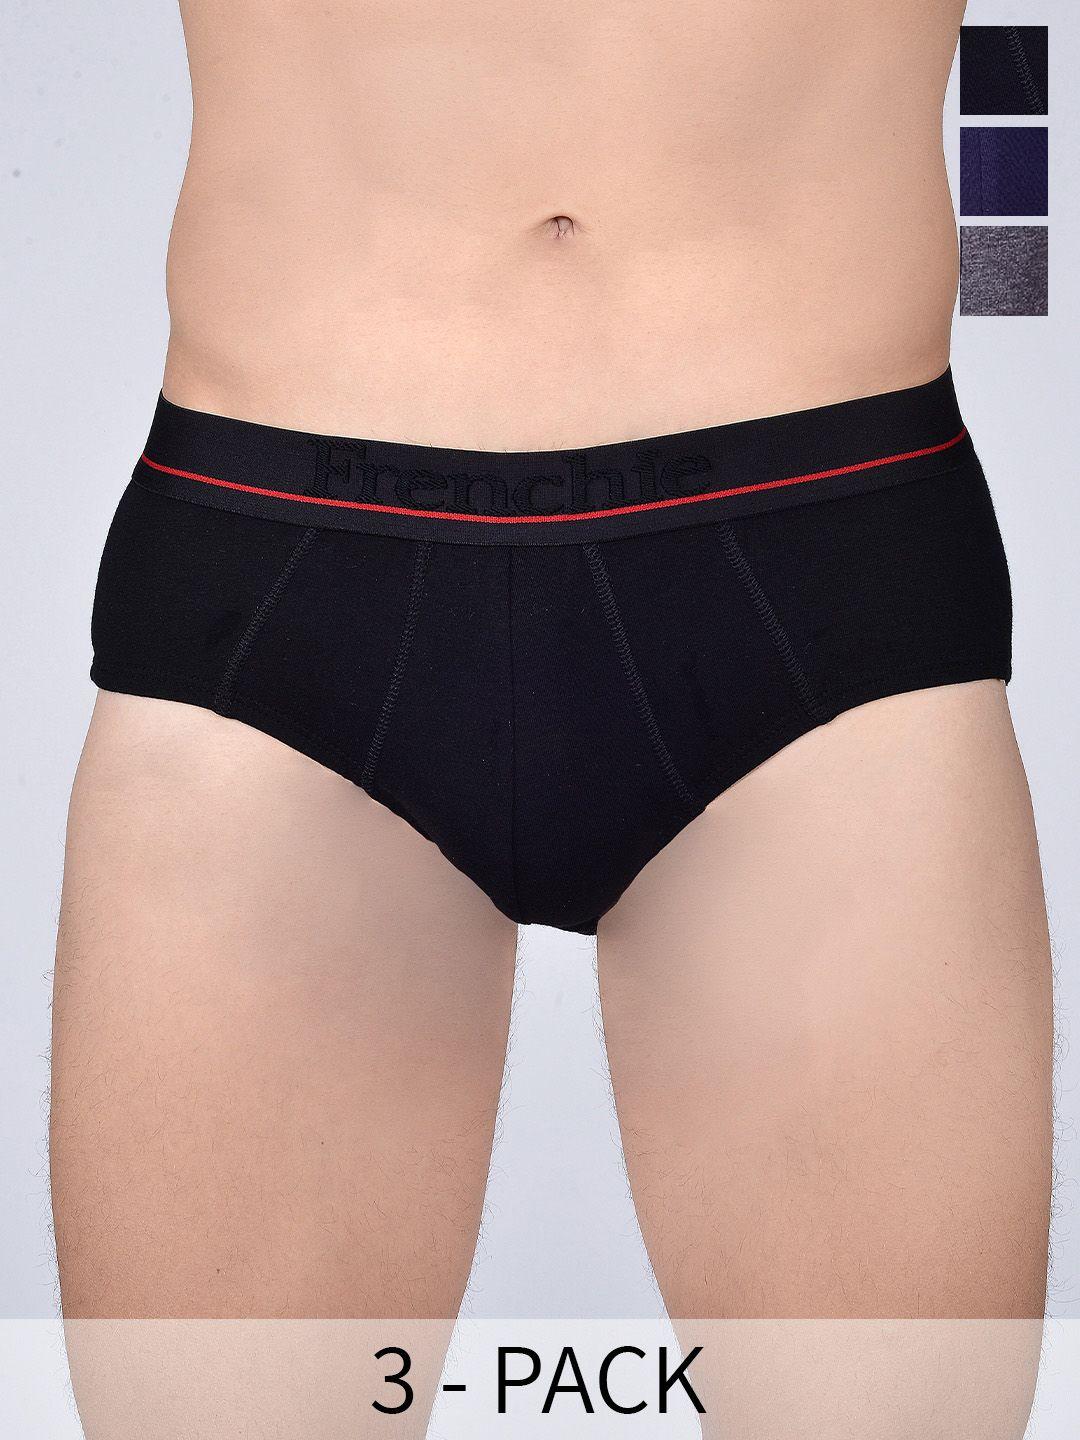 frenchie men pack of 3 assorted mid-rise pure cotton briefs casuals_4003_po3_s